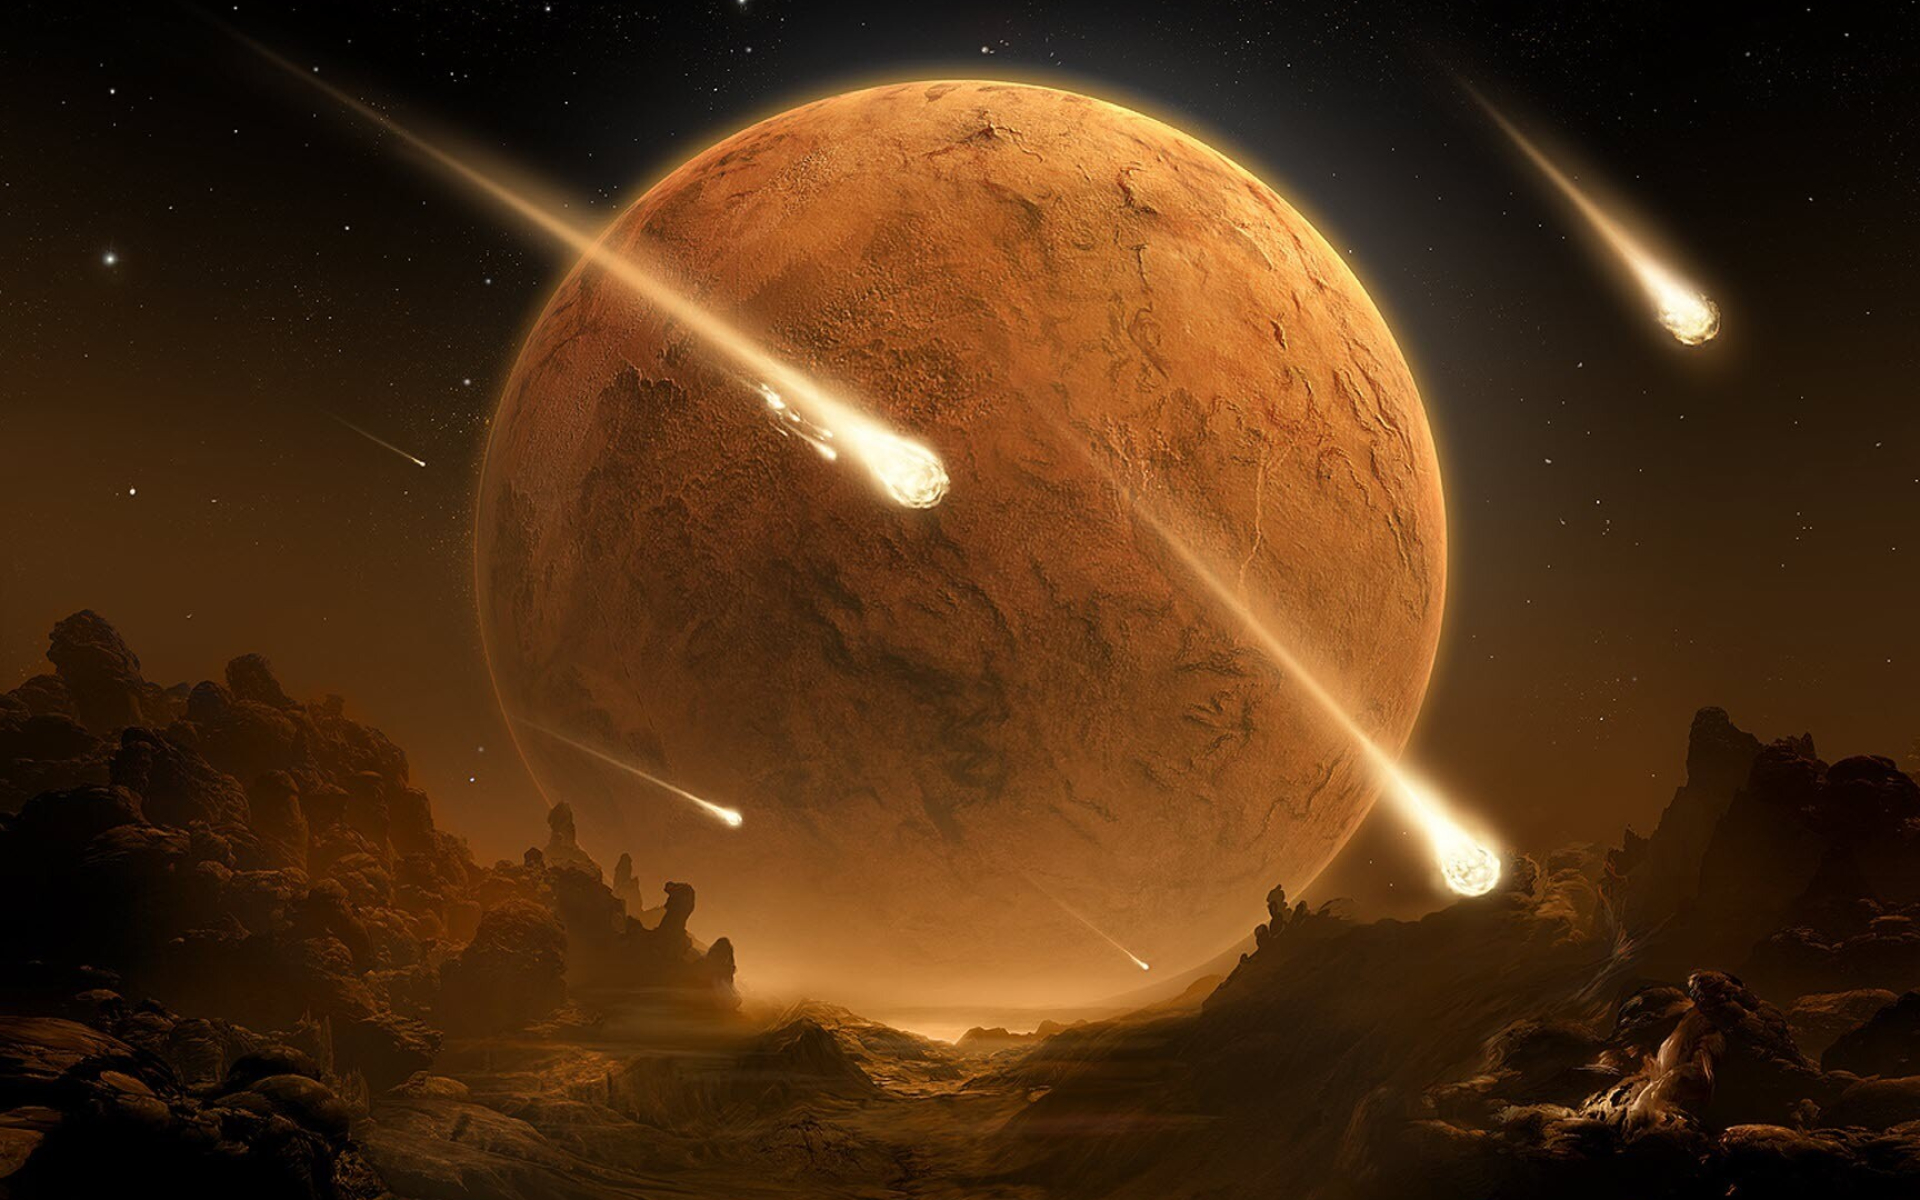 Meteor: Meteorites, Astronomical events seen from a planet's surface. 1920x1200 HD Wallpaper.